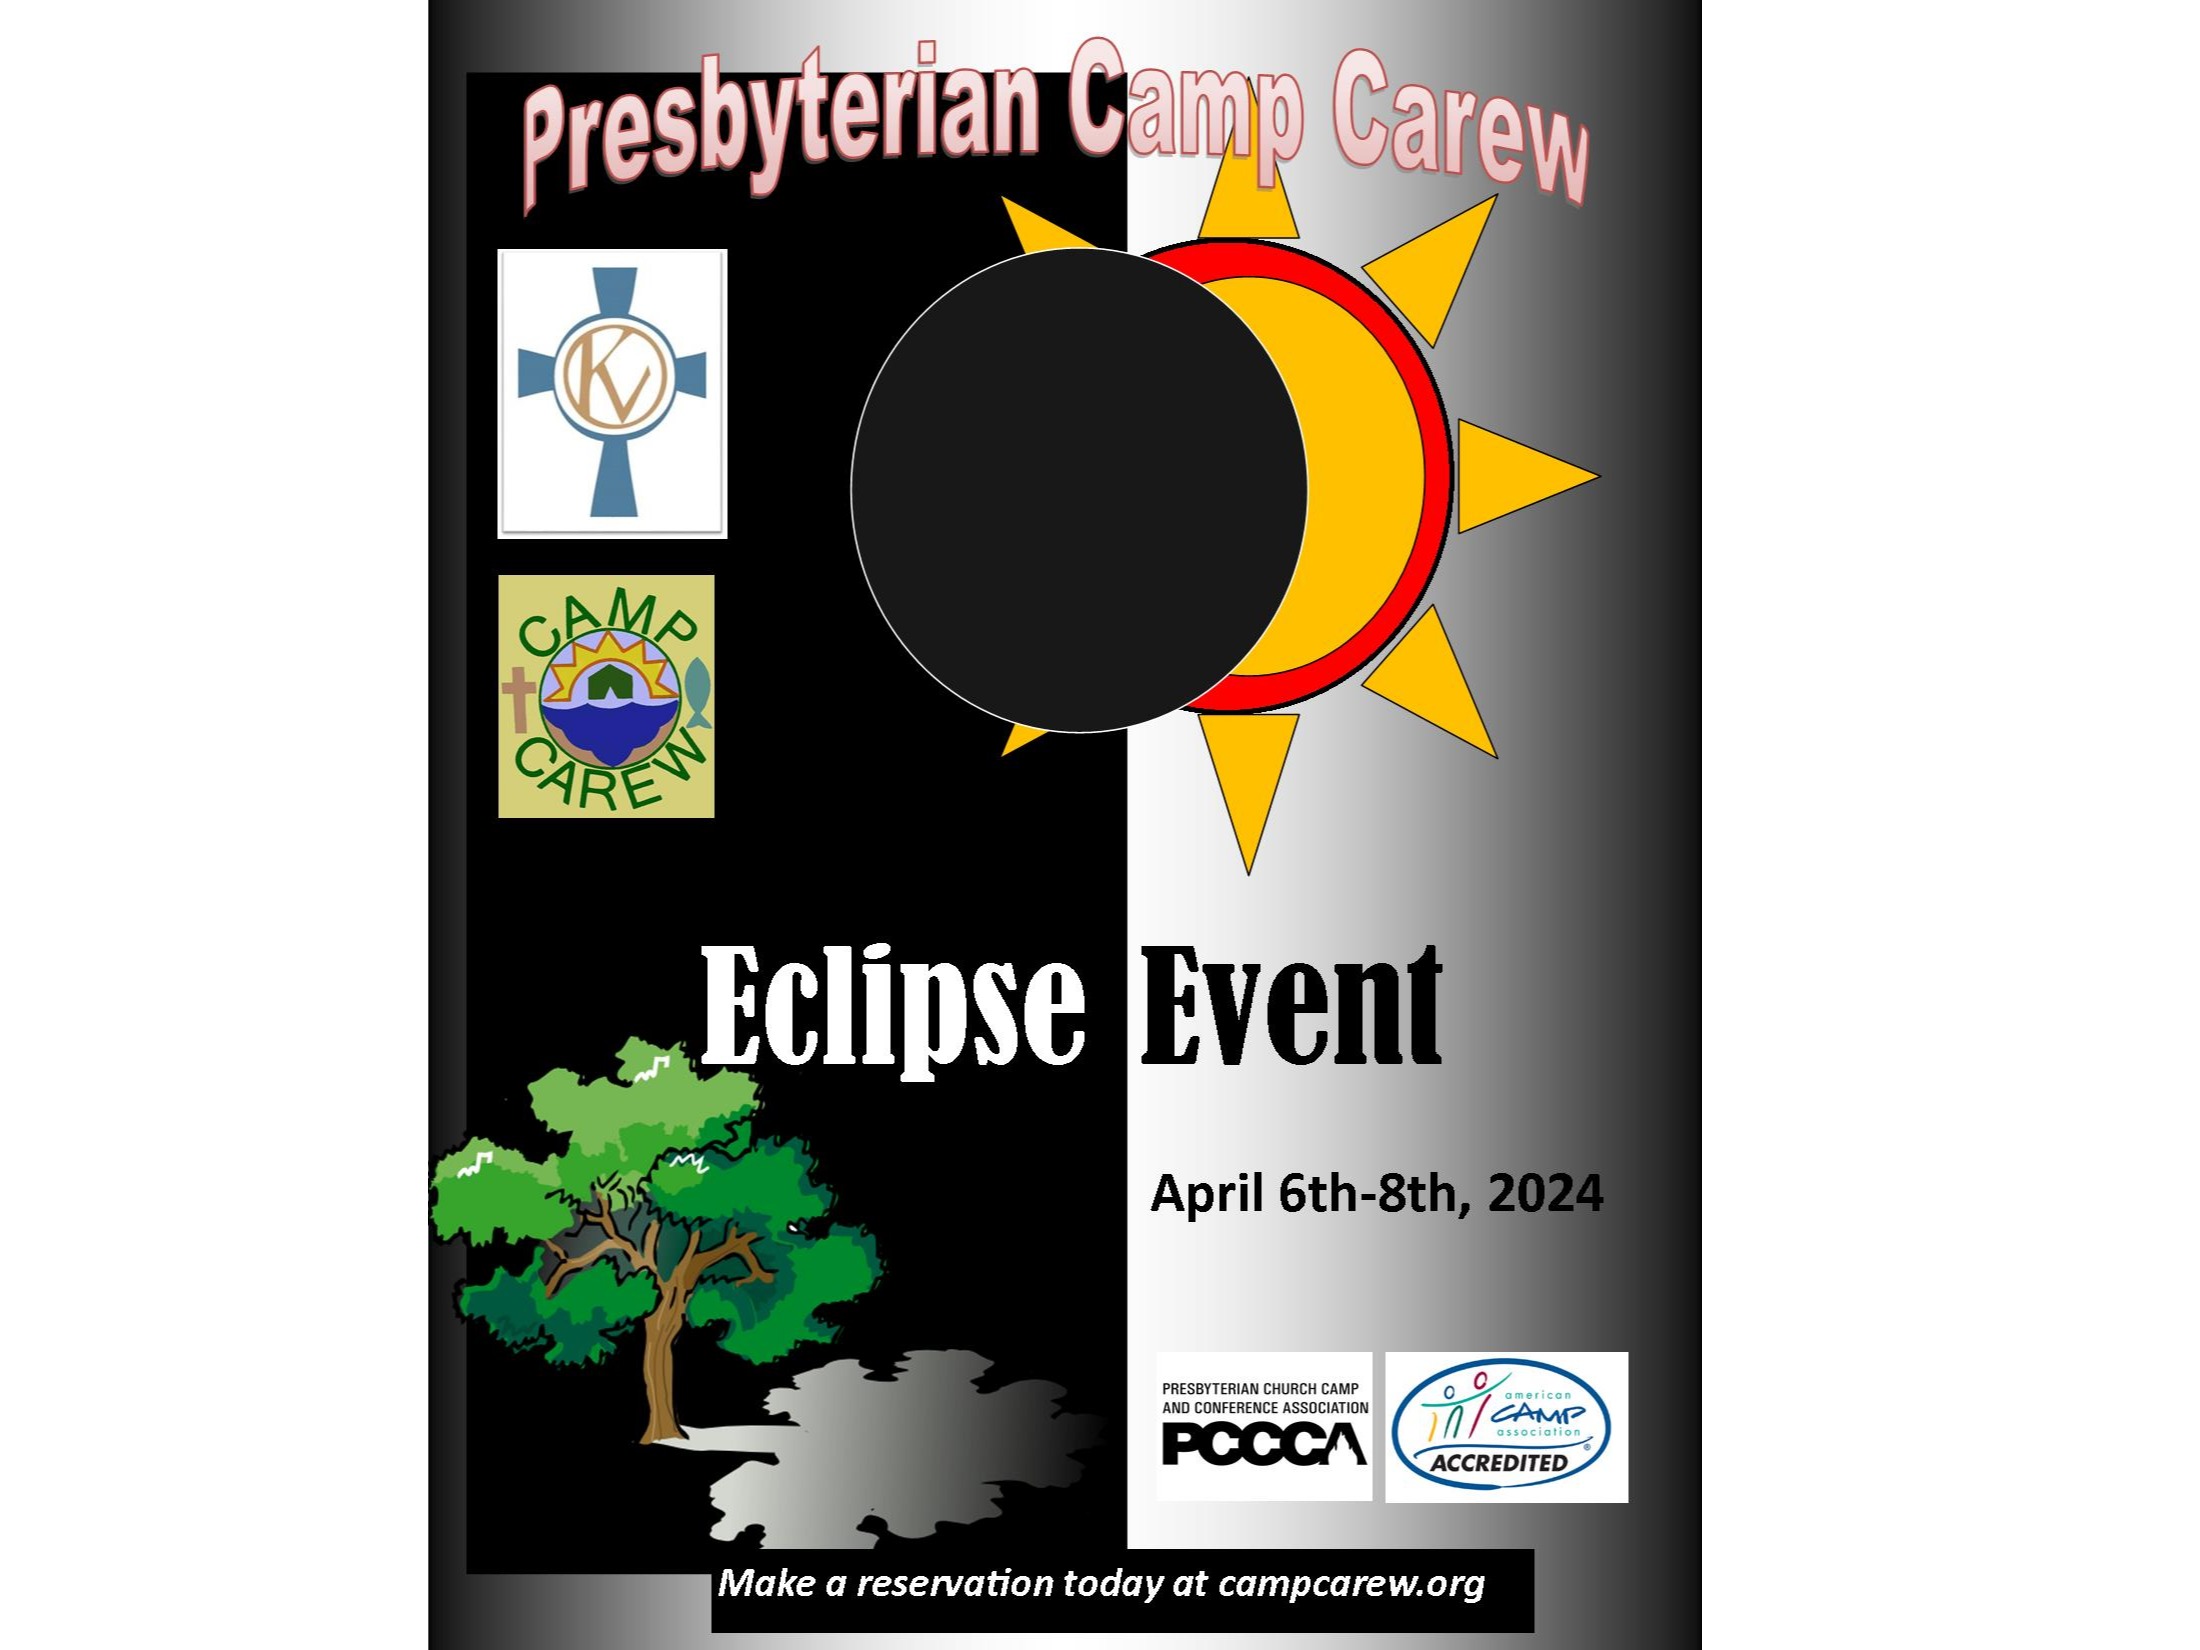 Eclipse Event 2024 $150.00 cost is per person. People can arrive Saturday and stay till the Event on Monday. $150.00/pp.  for Ryman and McNabb Cabins $125.00 for Knox and Witherspoon. Tent camping is $125.00.